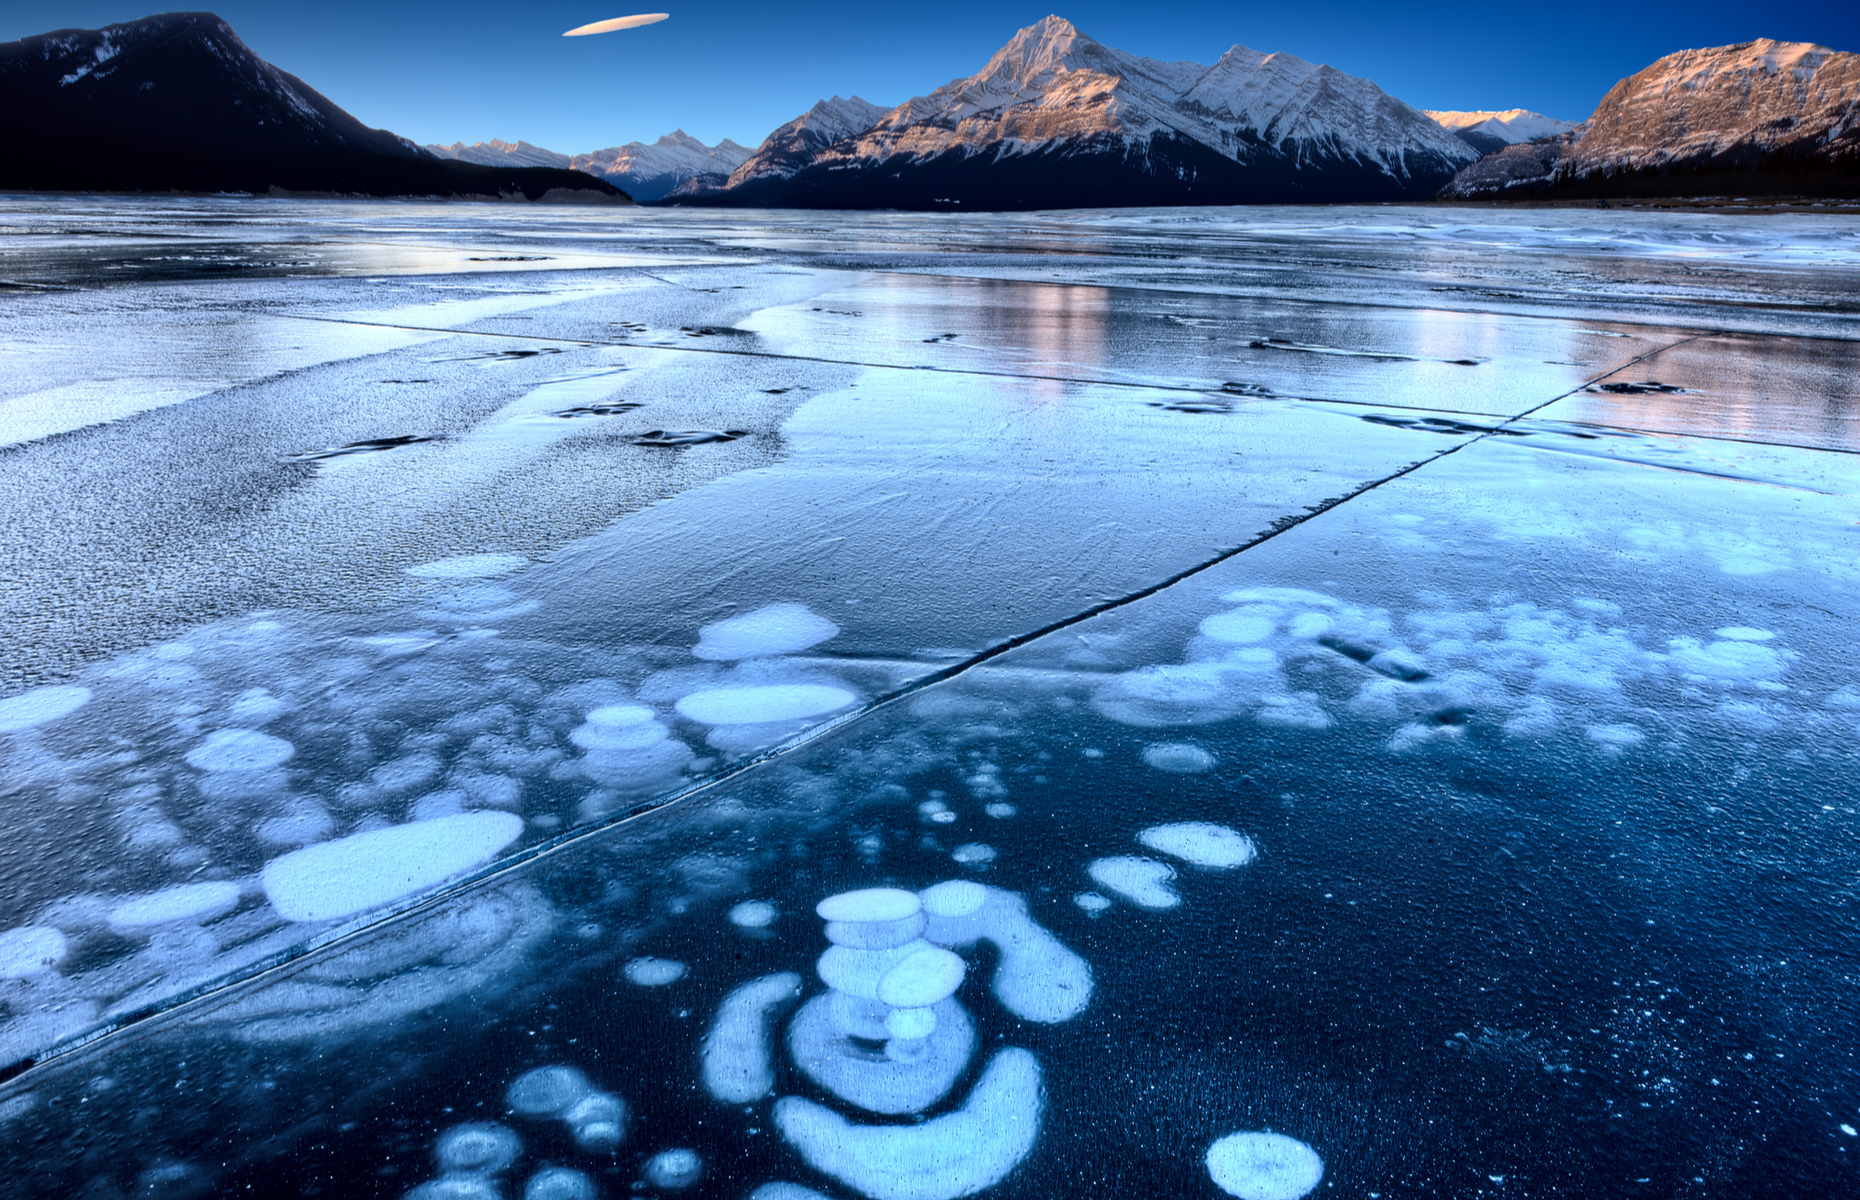 Abraham Lake in Canada (Image: Pictureguy/Shutterstock)